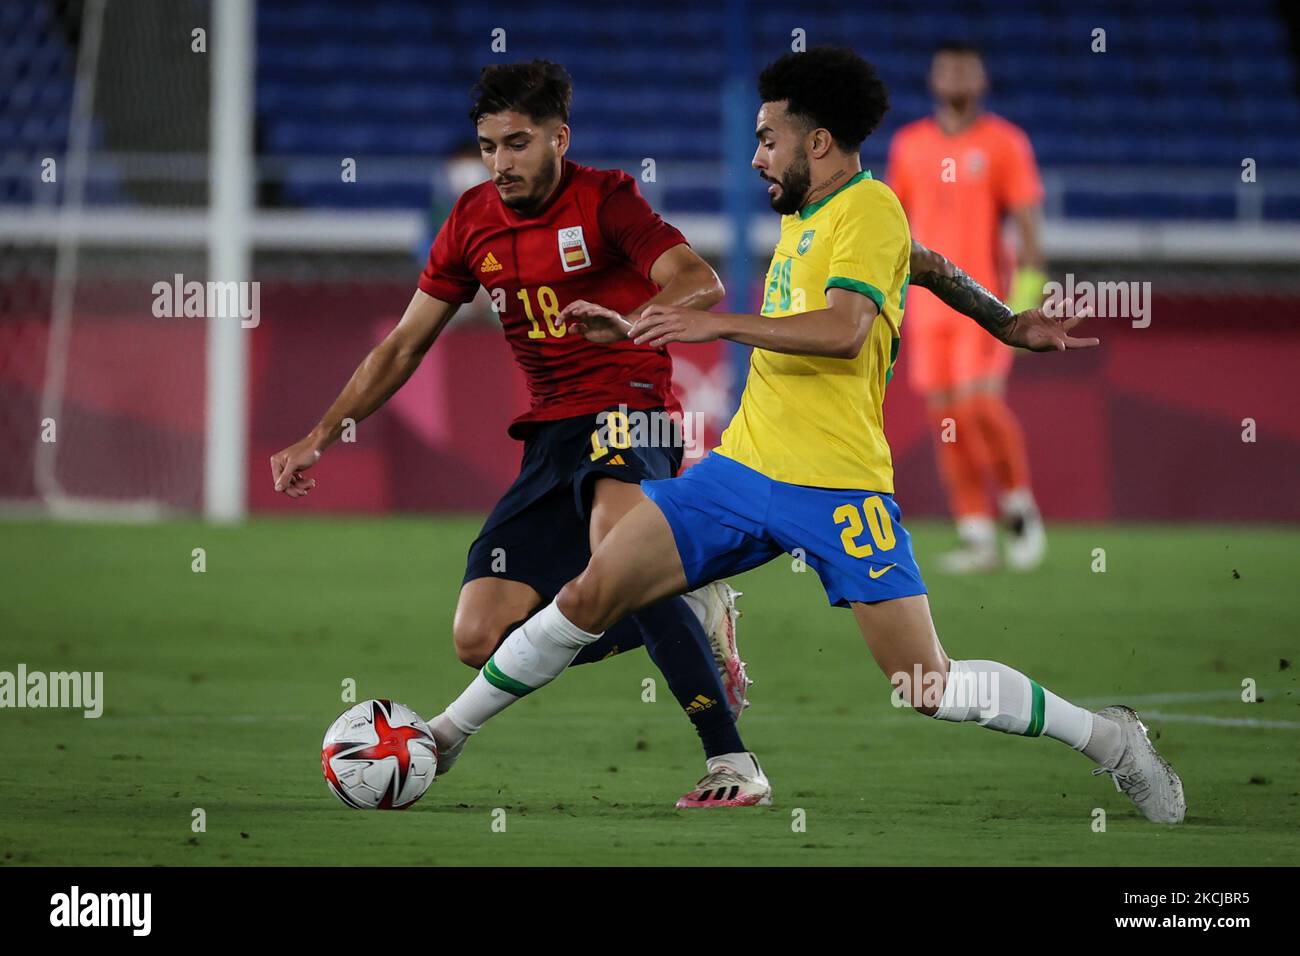 (20) CLAUDINHO of Team Brazil competes for the ball with (18) Oscar GIL of Team Spain during The match between Brazil and Spain on day Fifteenth of the Tokyo 2020 Olympic Games at International Stadium Yokohama on August 07, 2021 in Yokohama, Kanagawa, Japan (Photo by Ayman Aref/NurPhoto) Stock Photo